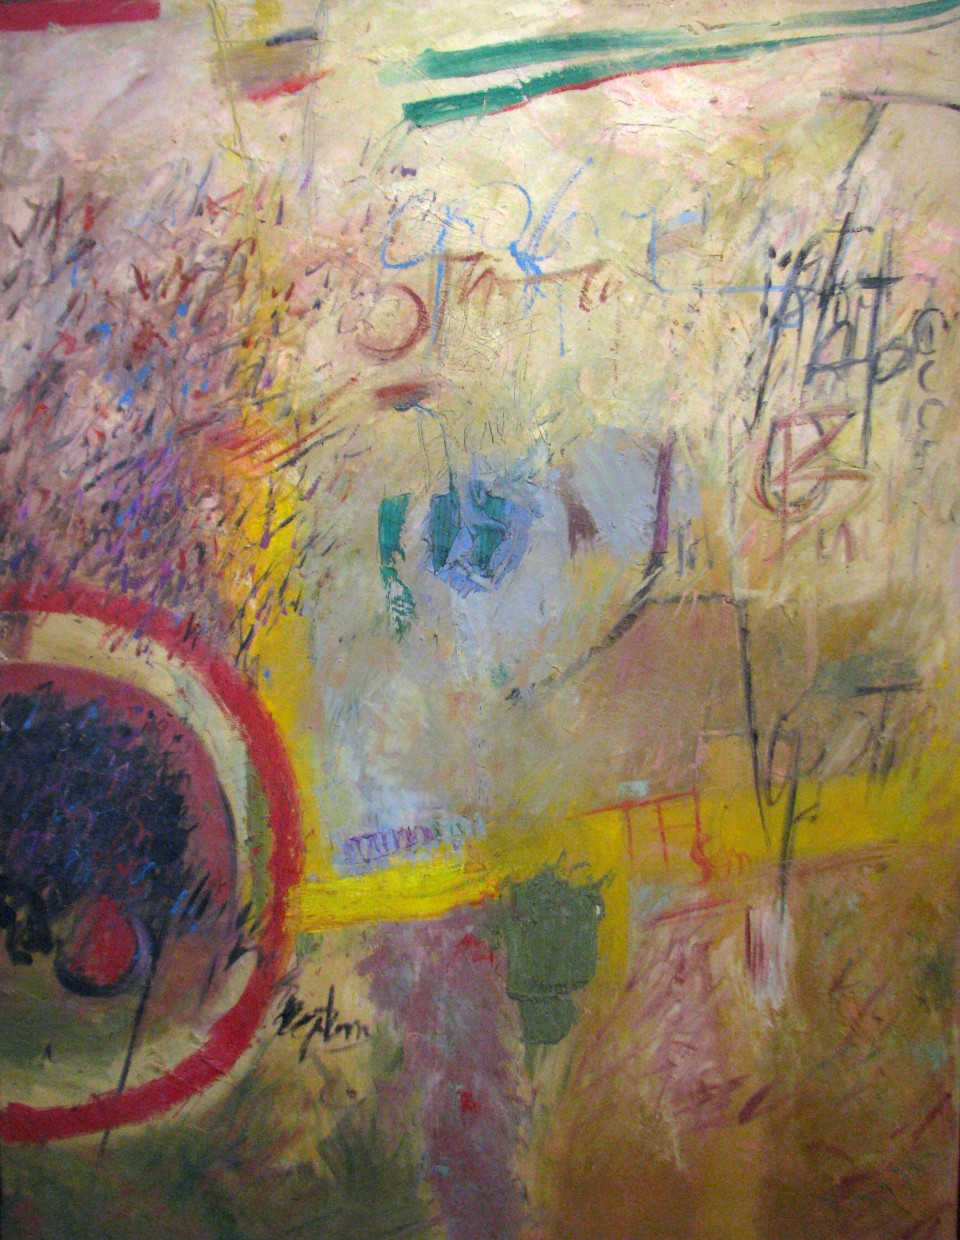 Red Ring Abstraction, Ca. 1960
Oil on Canvas